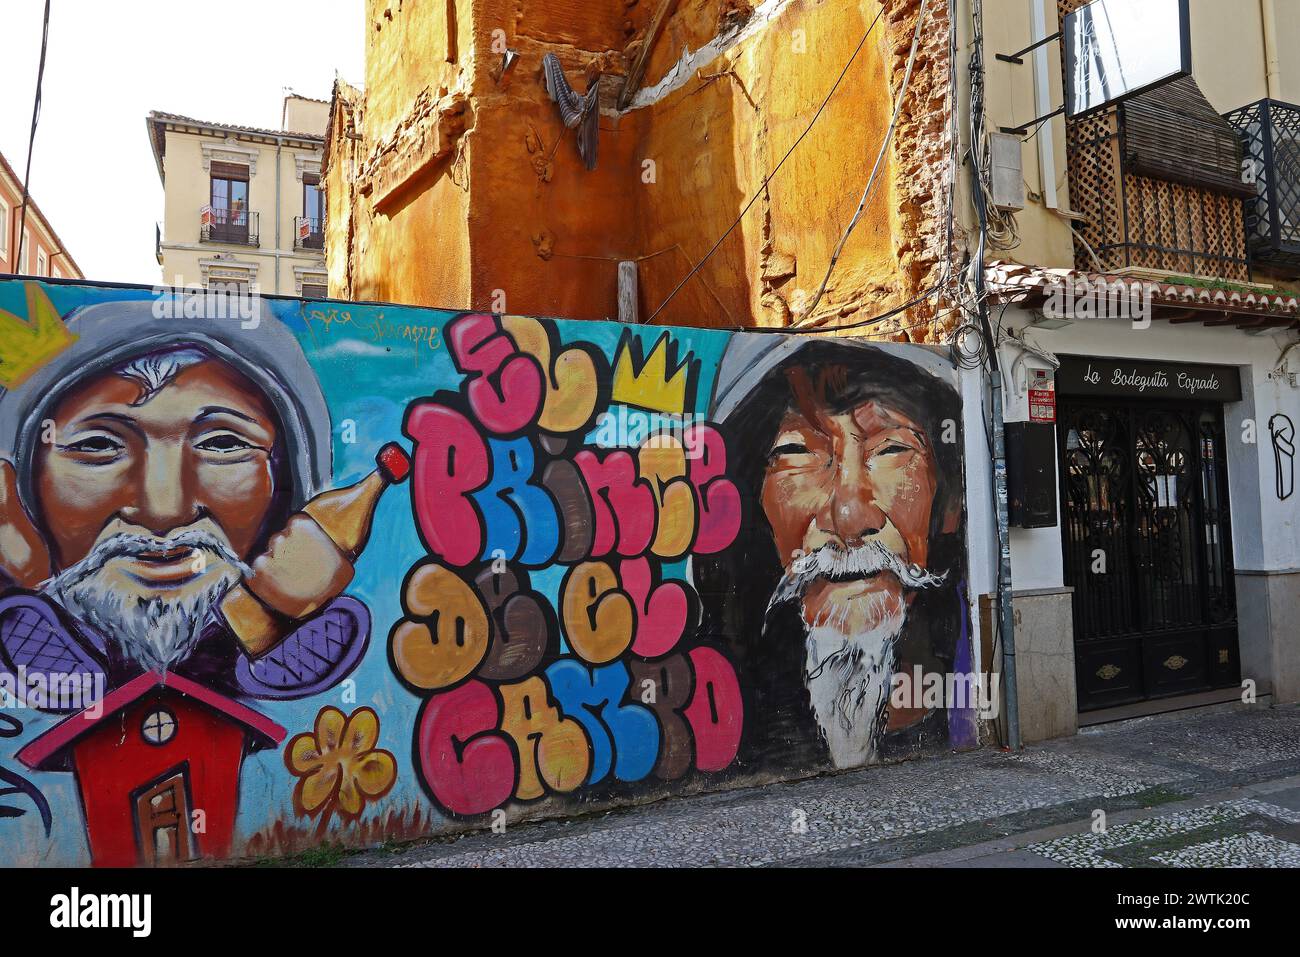 A vibrant street mural decorates a wall in the bohemian neighbourhood of Realejo Granada Spain, revealing a contemporary side to this historic city Stock Photo